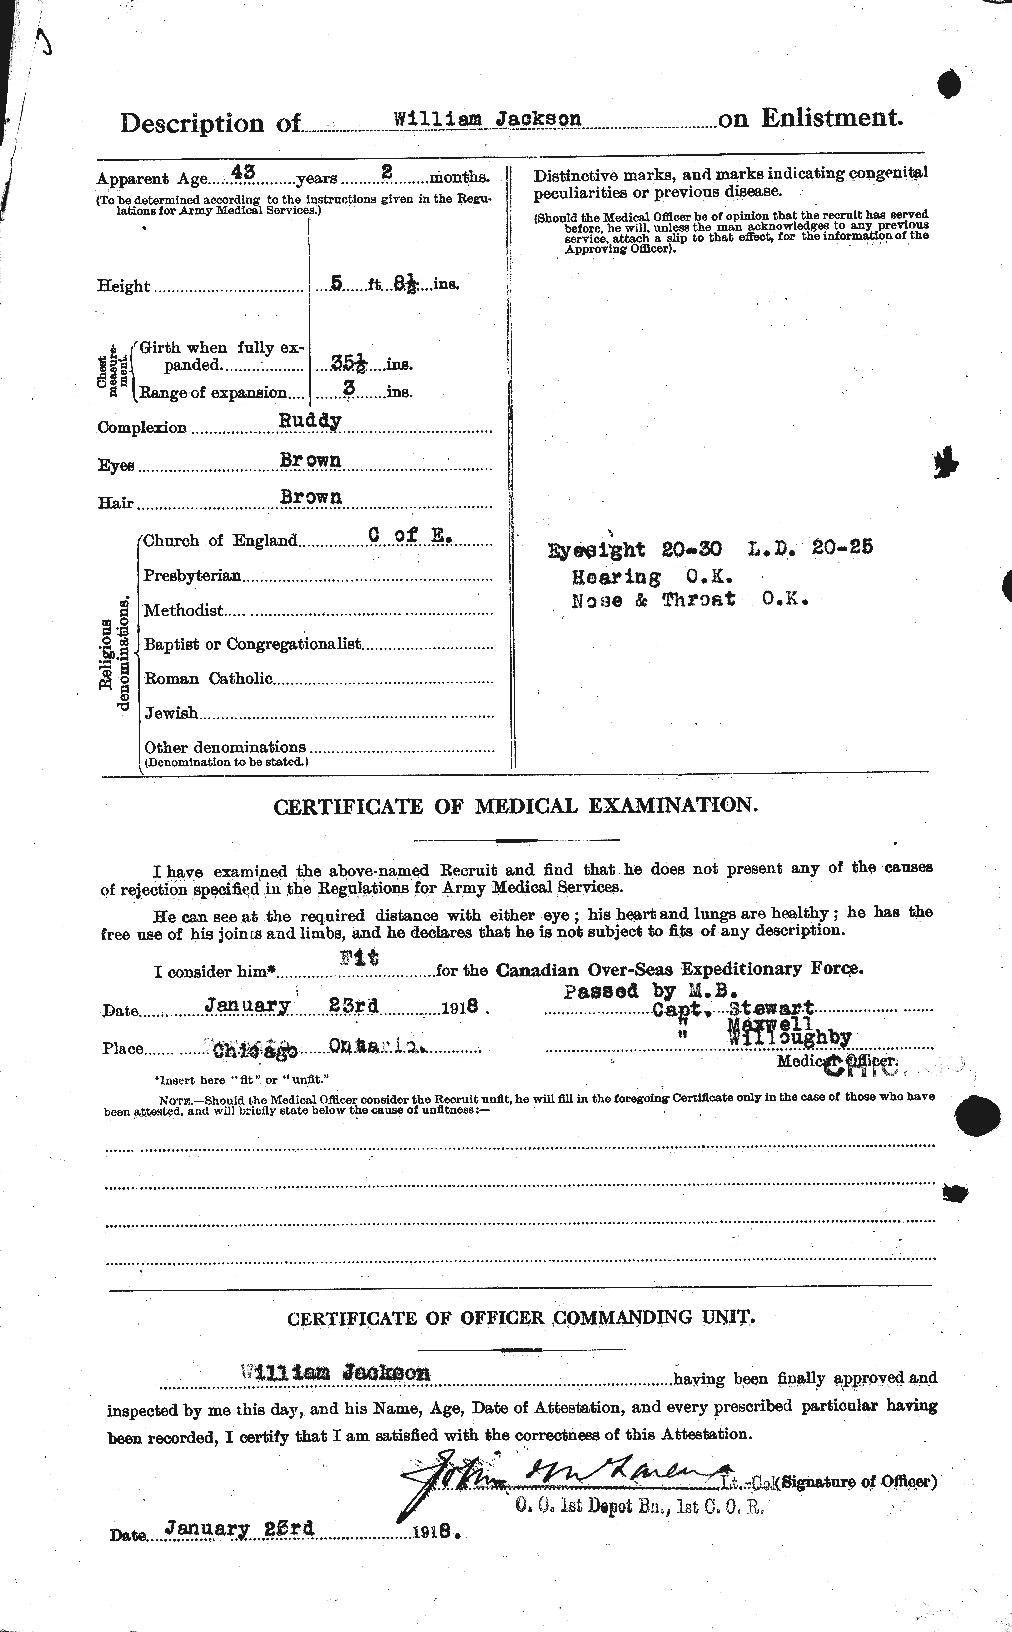 Personnel Records of the First World War - CEF 412447b